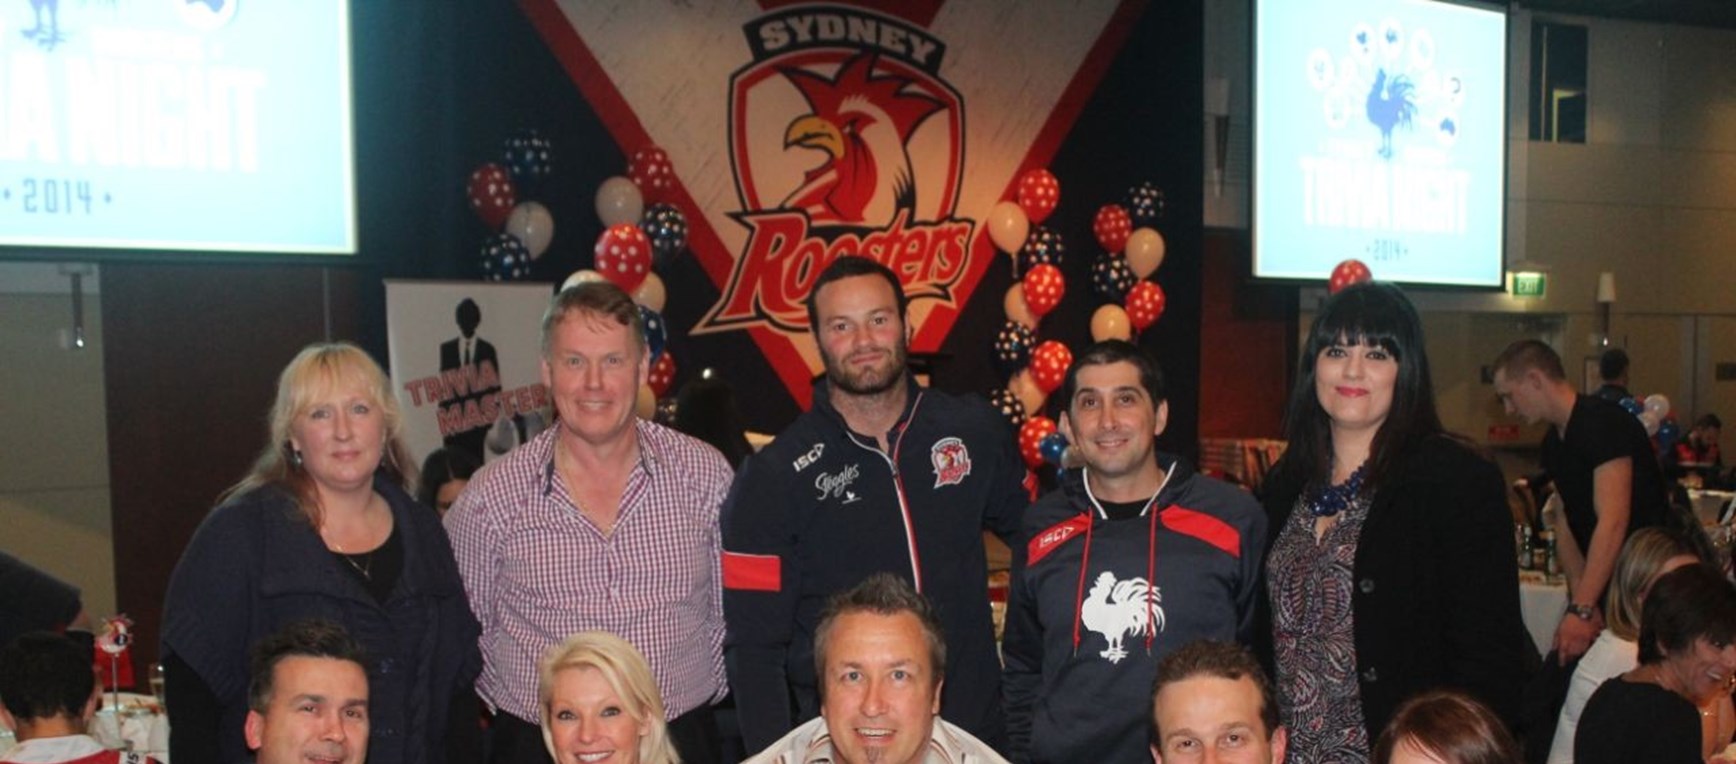 2014 Roosters Trivia Night